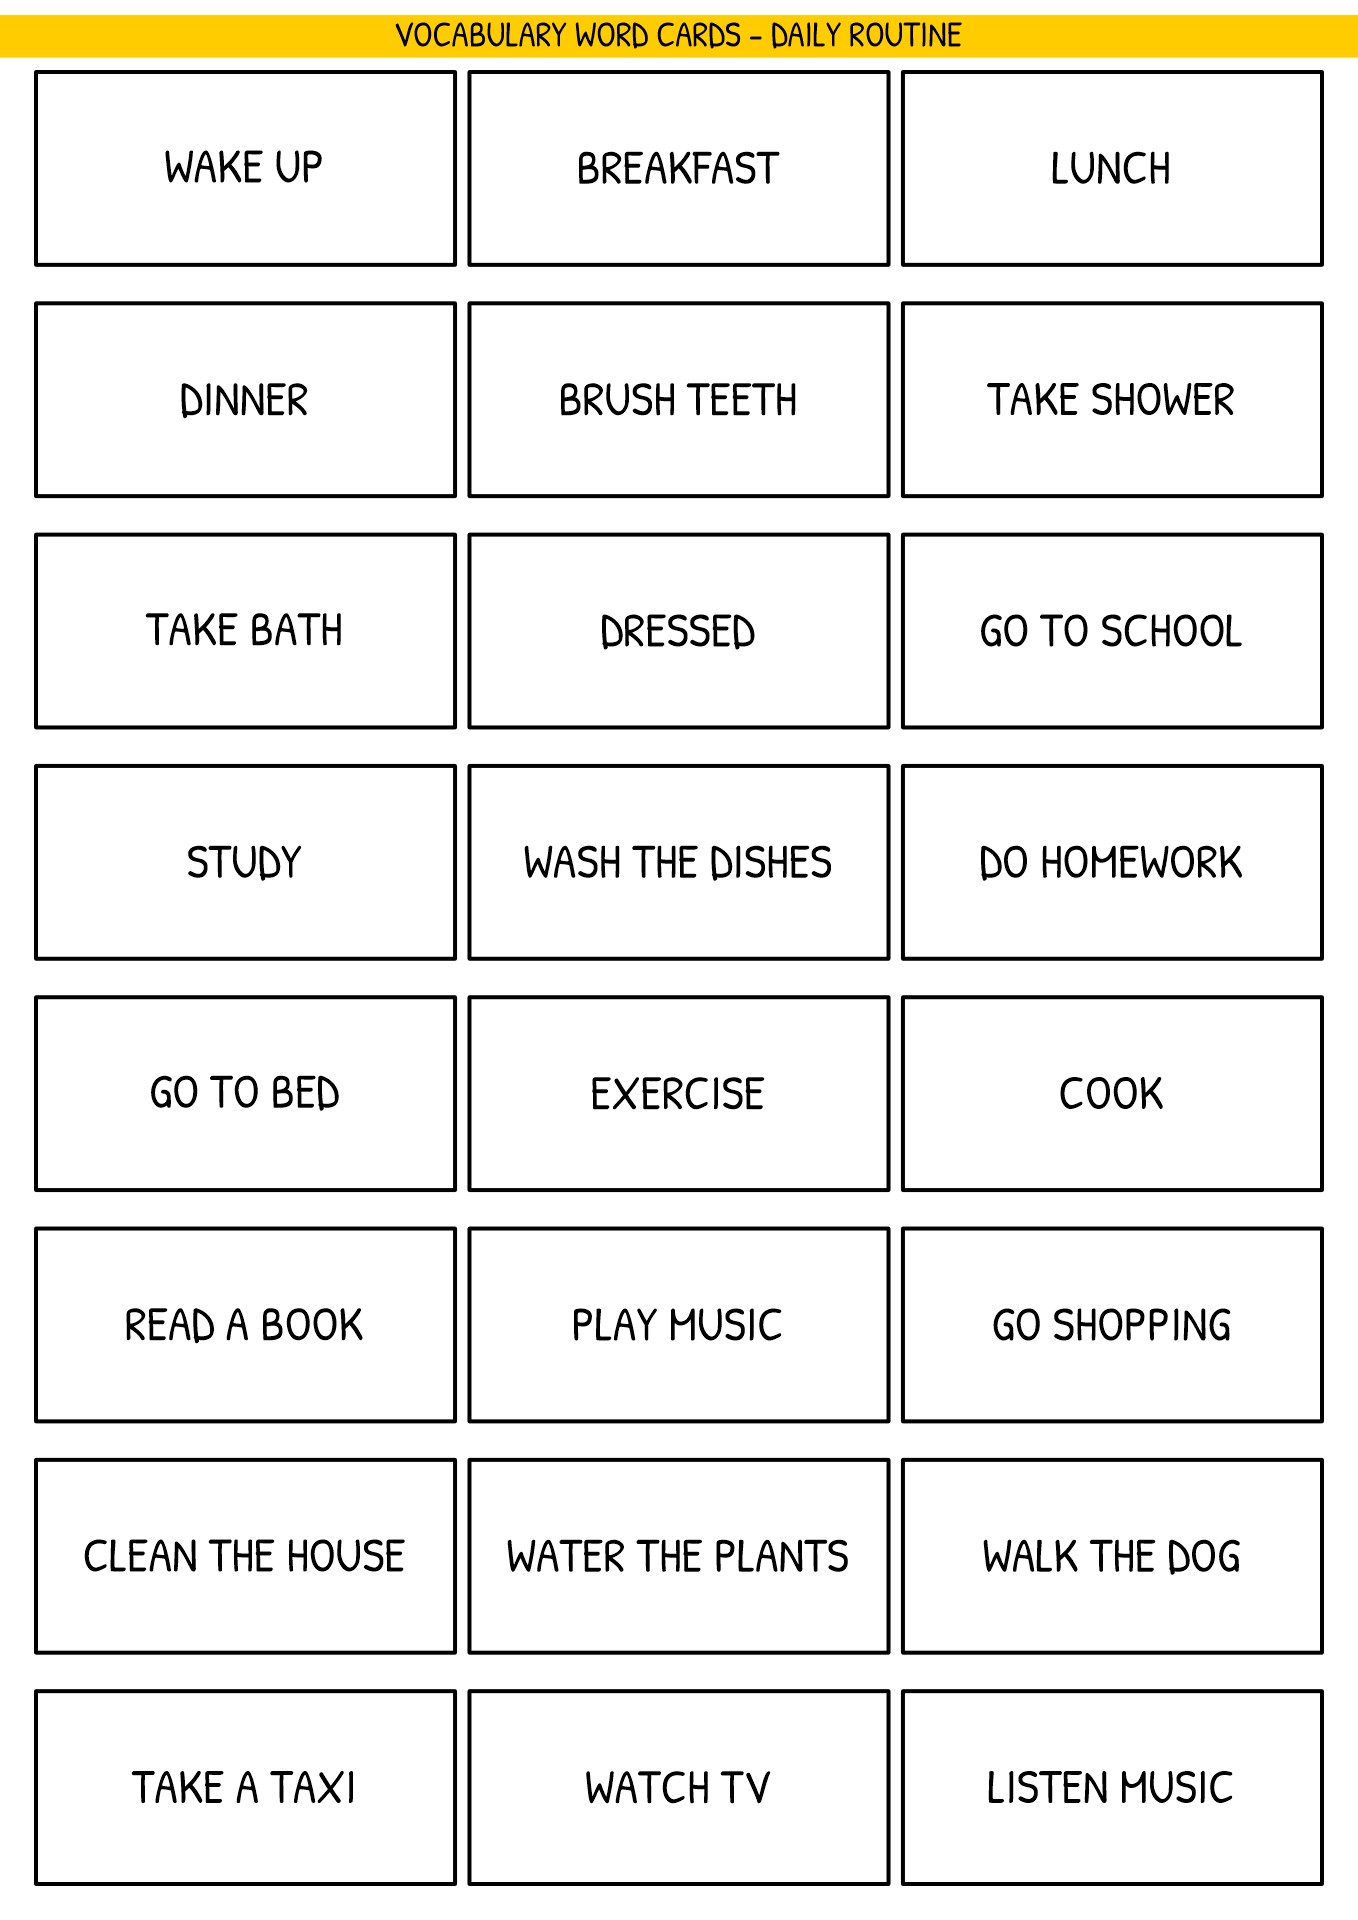 Vocabulary Word Cards Template